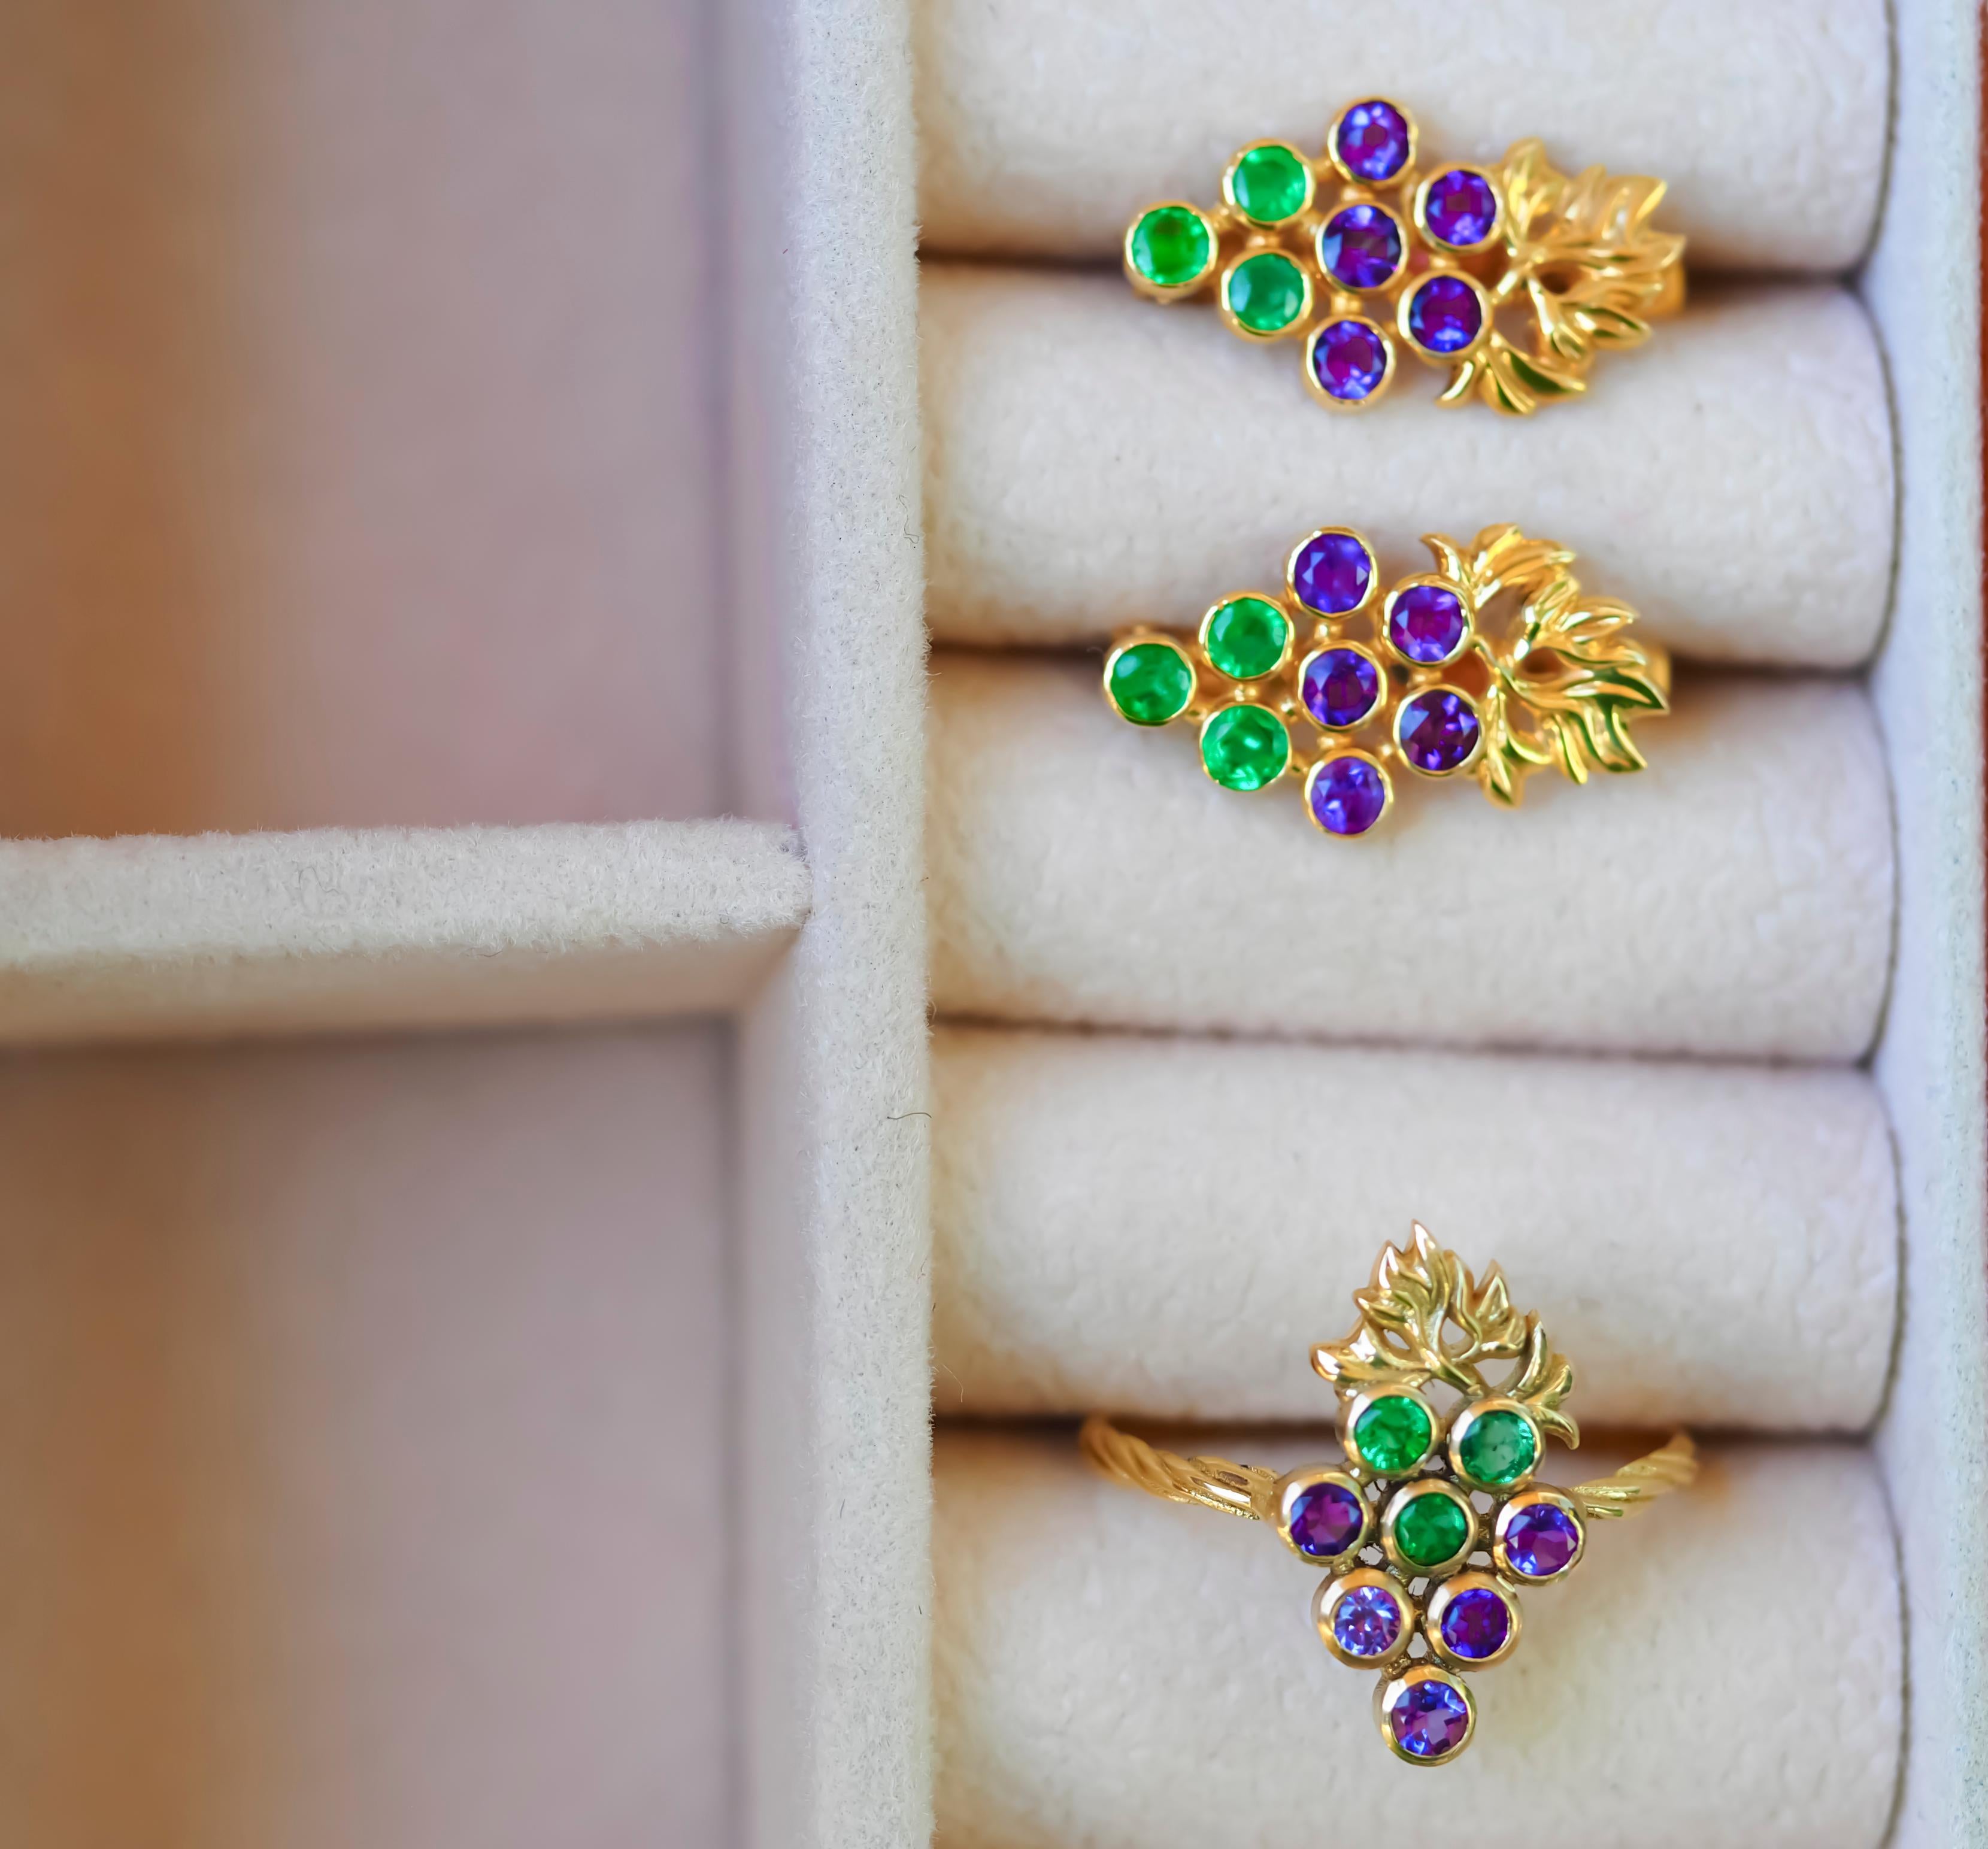 Women's Gold Ring and Earrings with Emeralds and Amethysts